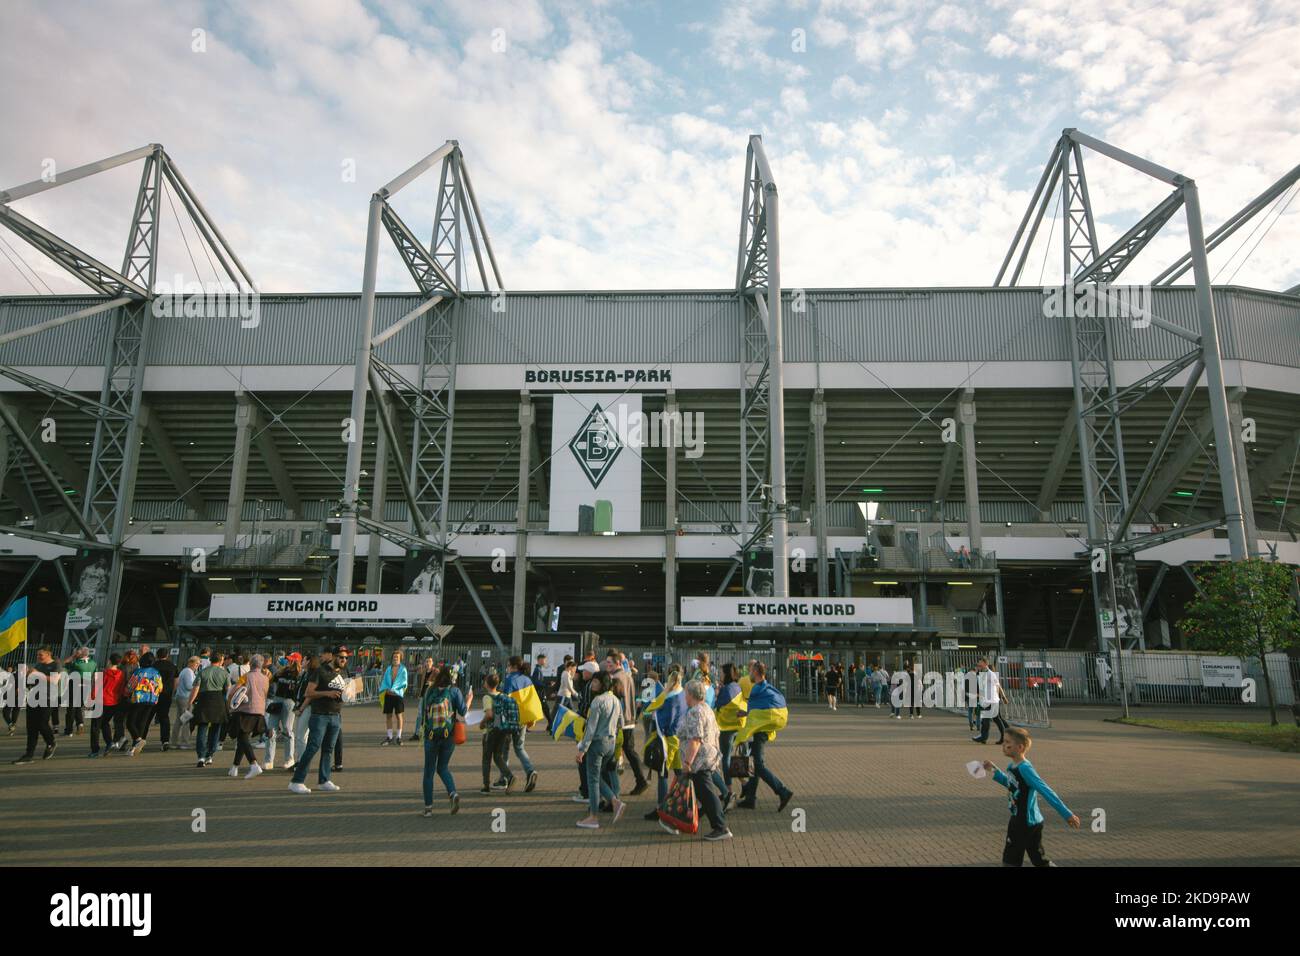 Ukrain footballs fans are seen entering the stadium of Borussia Park in Moenchengladbach, Germany on May 11, 2022 before the charity match between the Ukraine national team and Borussia Moenchengladbach team. (Photo by Ying Tang/NurPhoto) Stock Photo